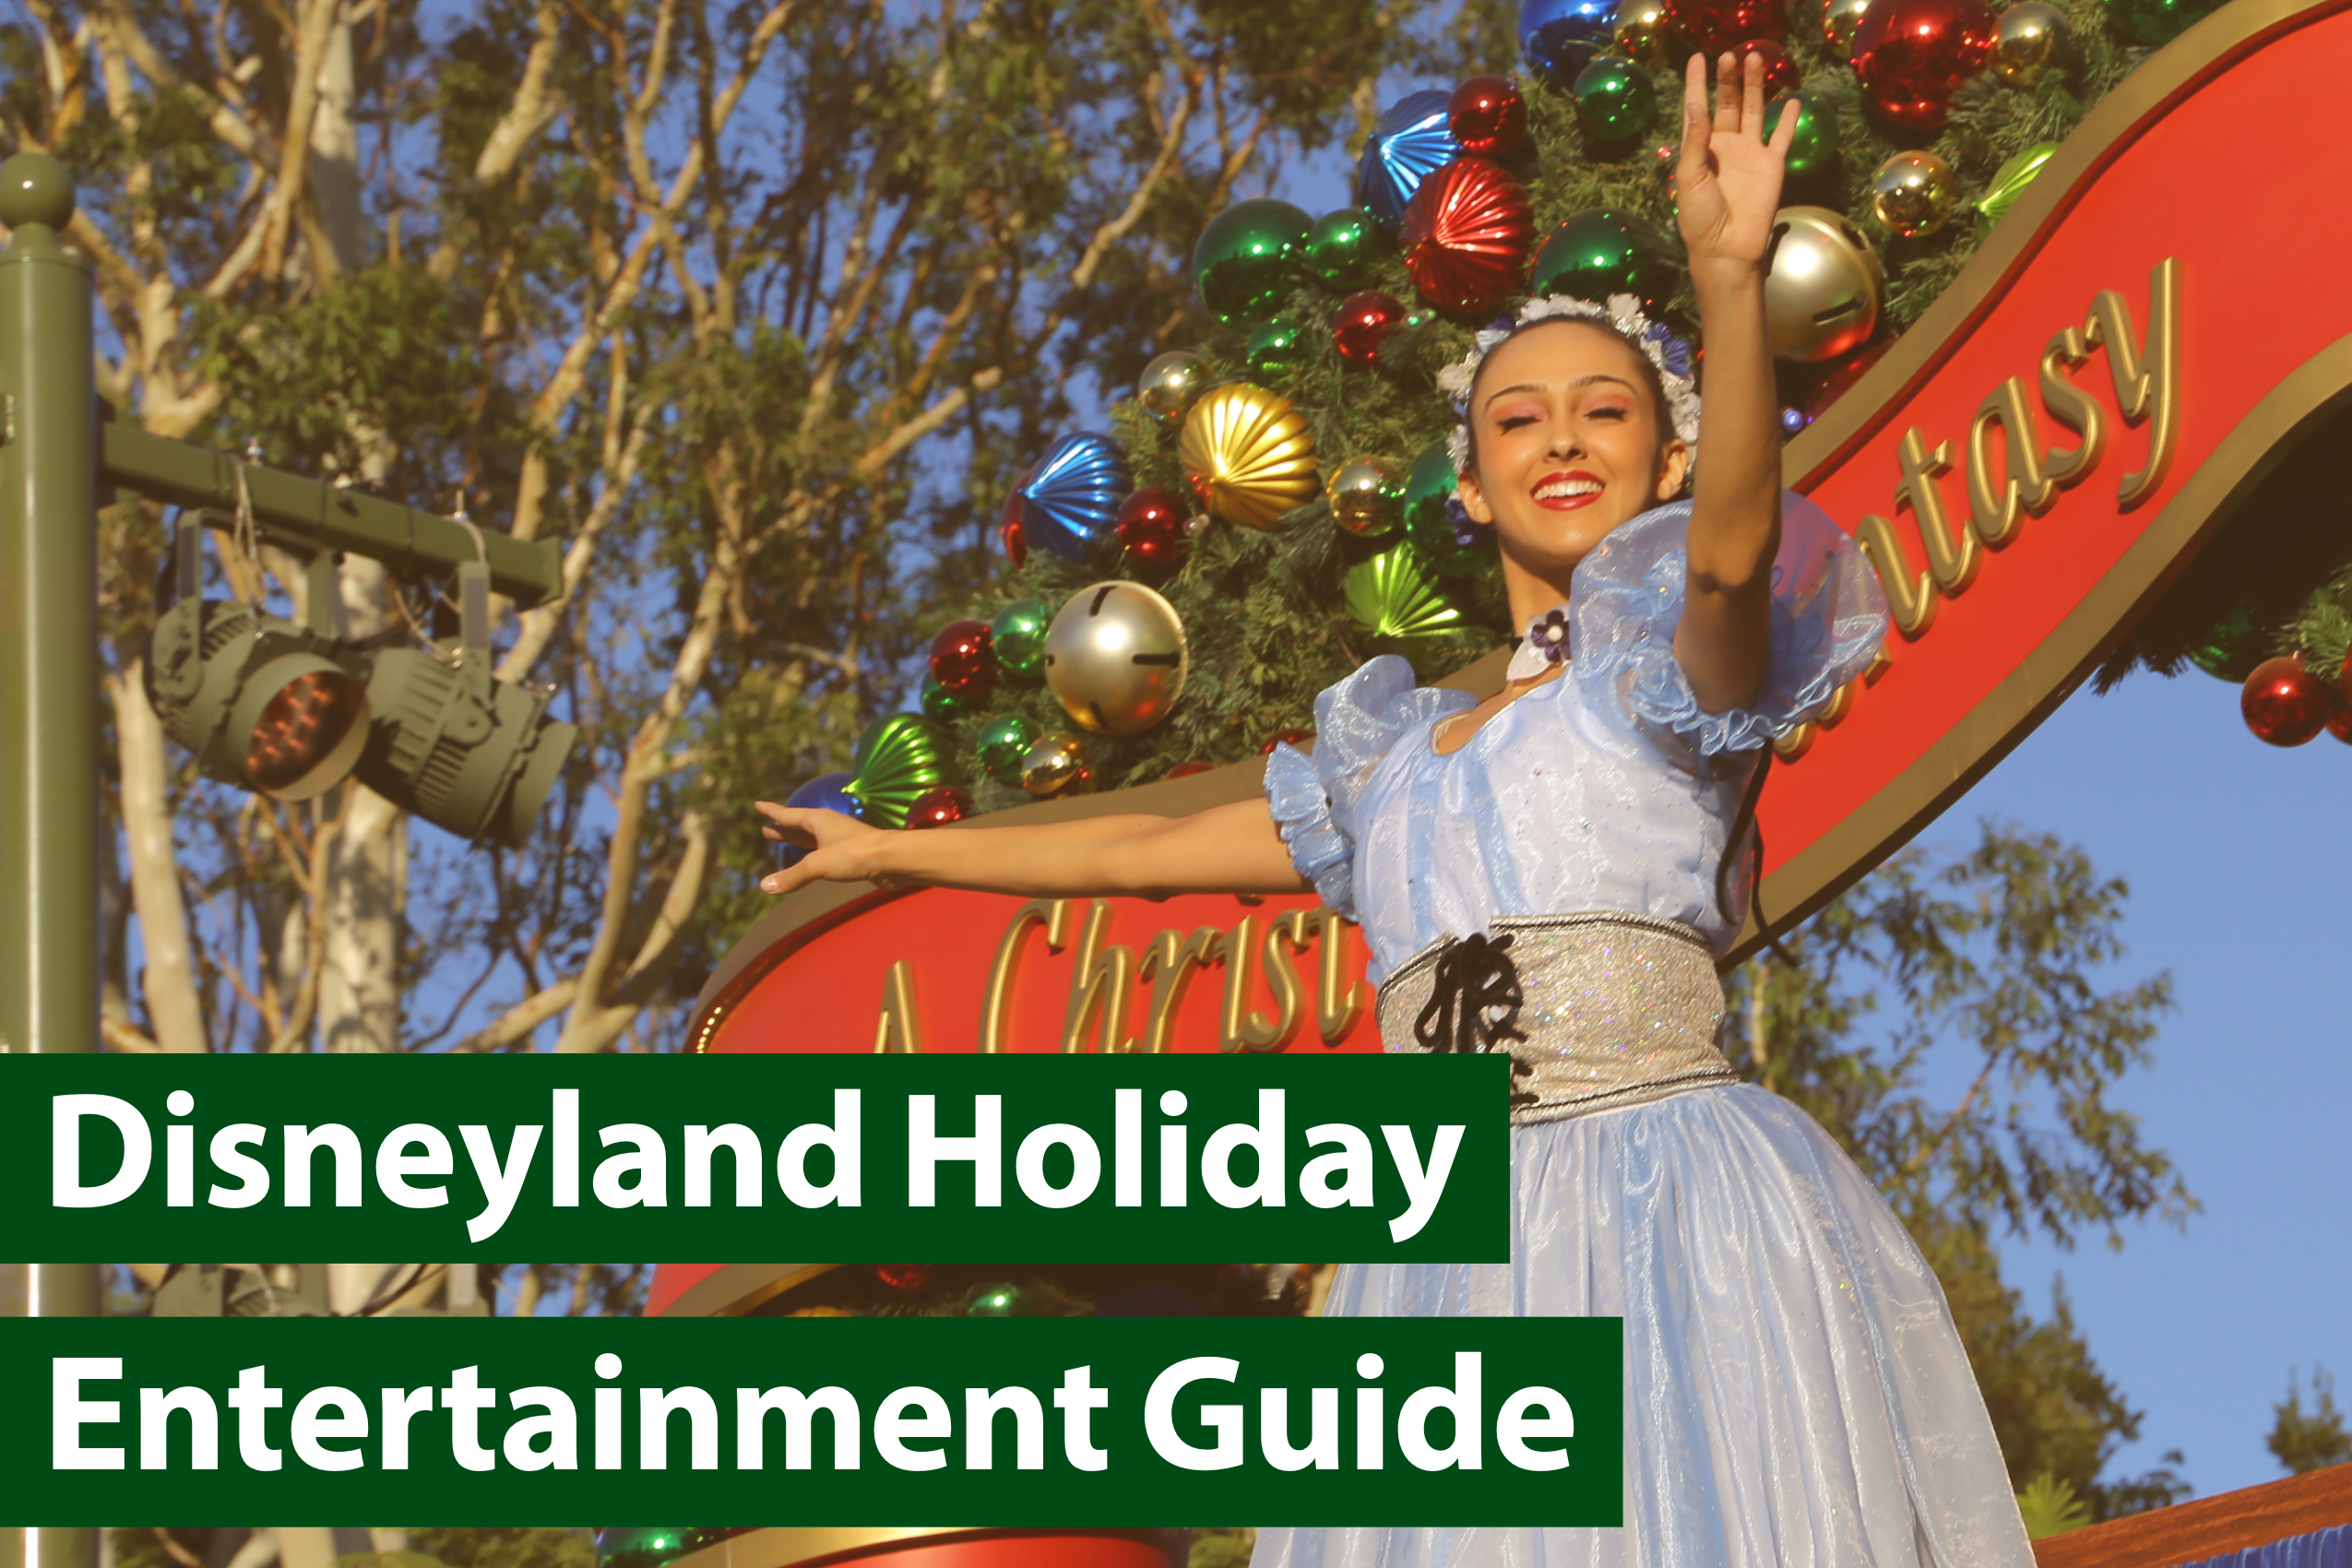 Experience the Magic of the 2018 Holiday Season with Your Guide to Entertainment at Disneyland Park